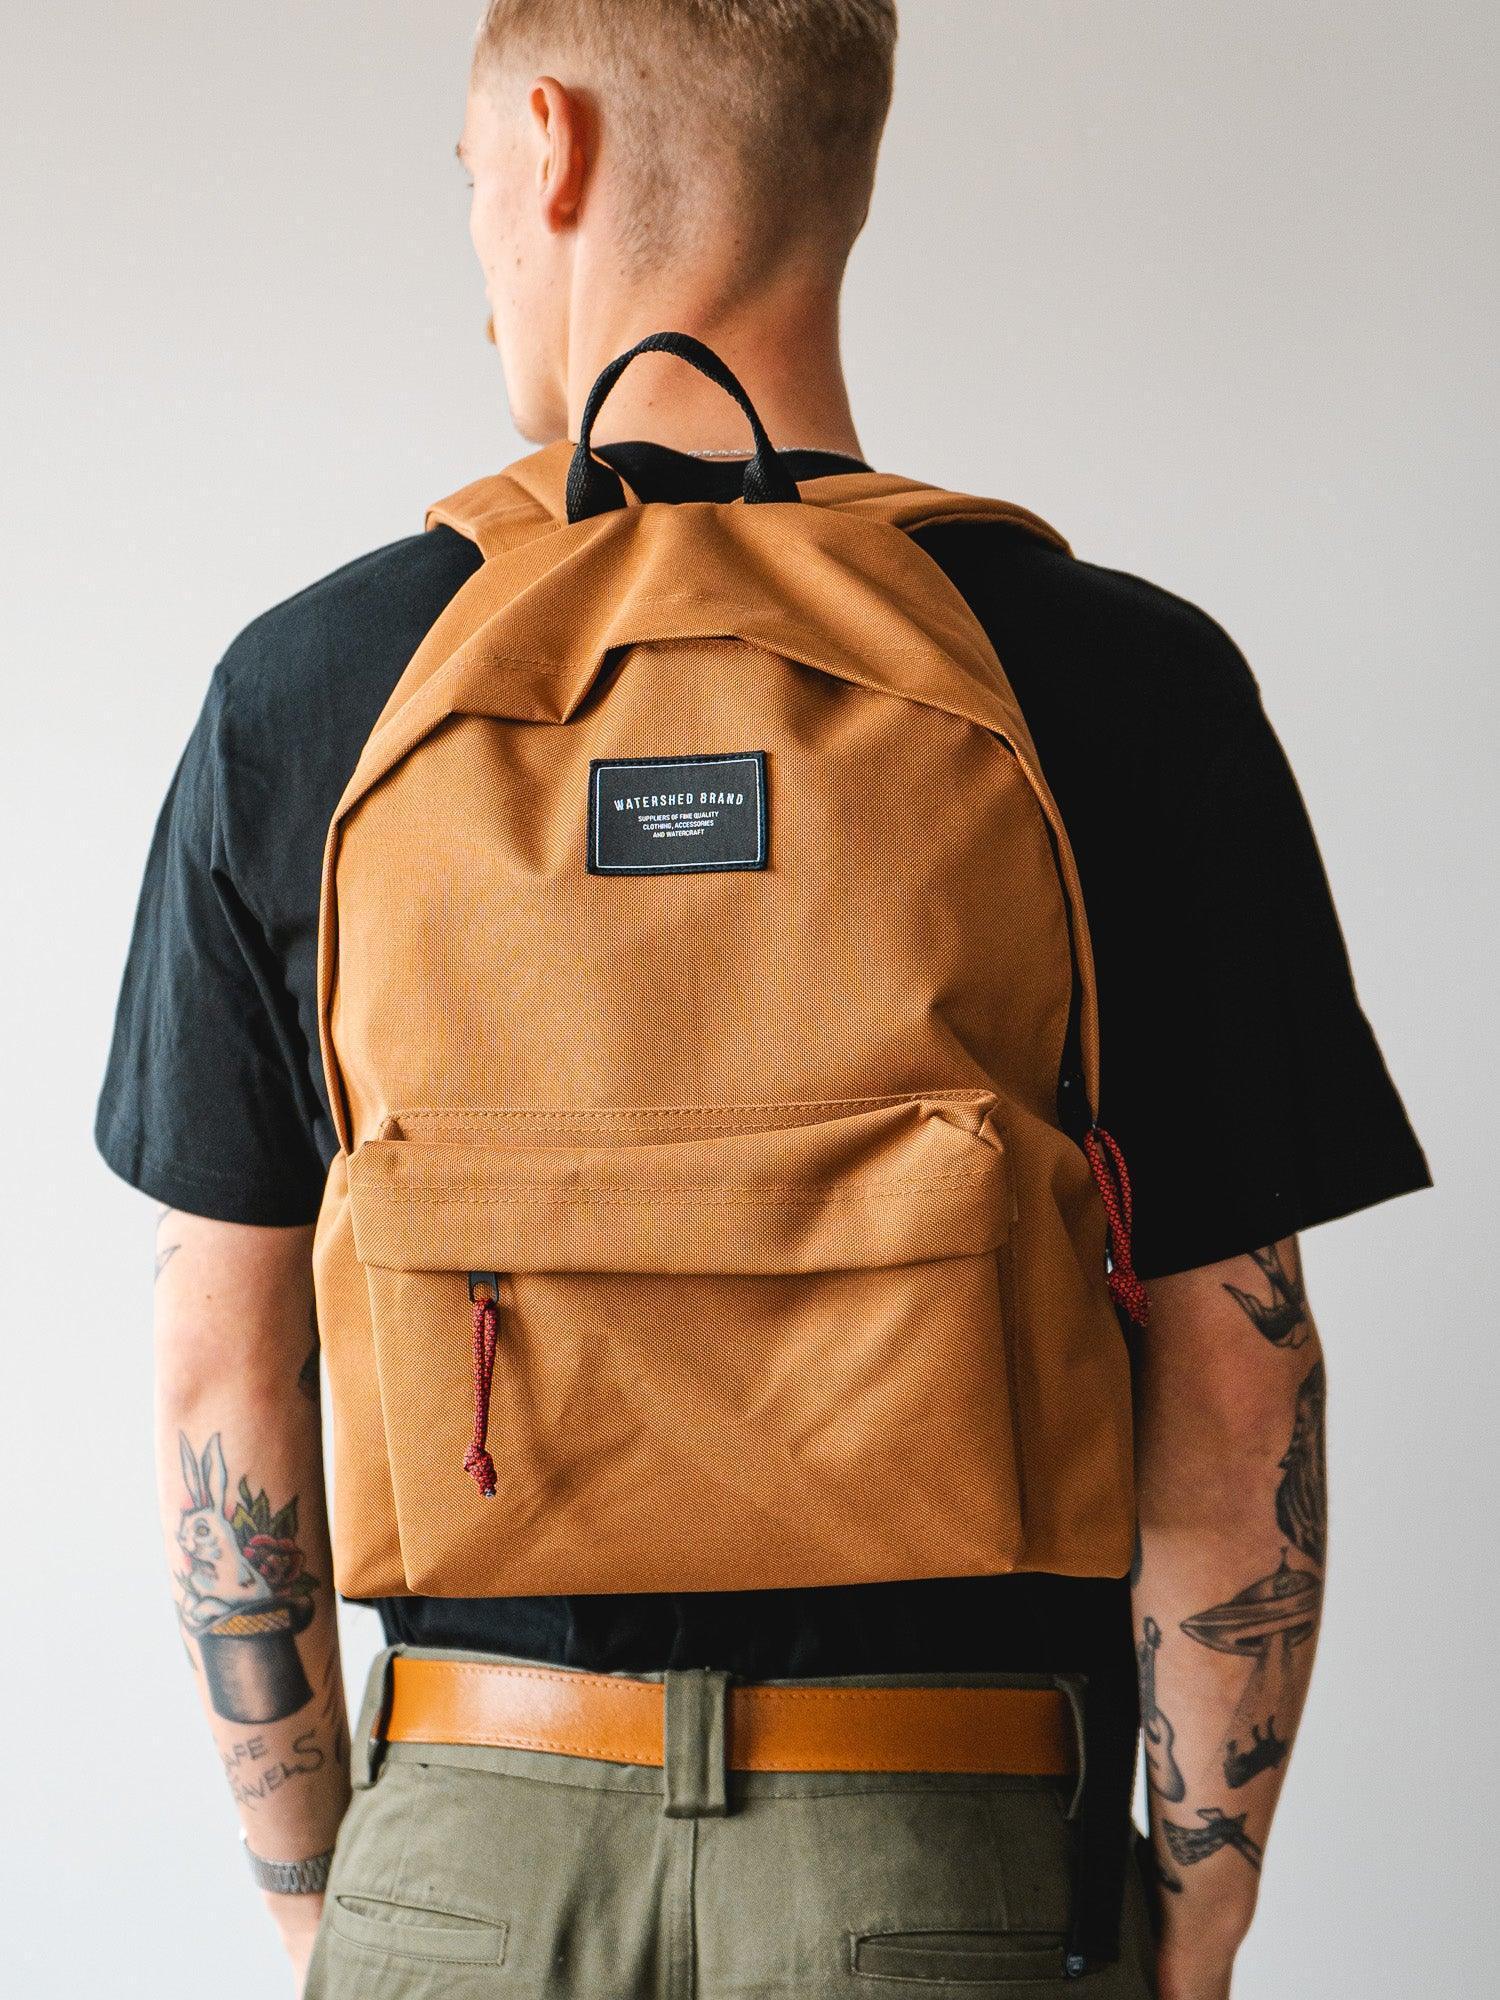 Surfing and Lifestyle Brand Watershed Union Backpack - everyday backpack